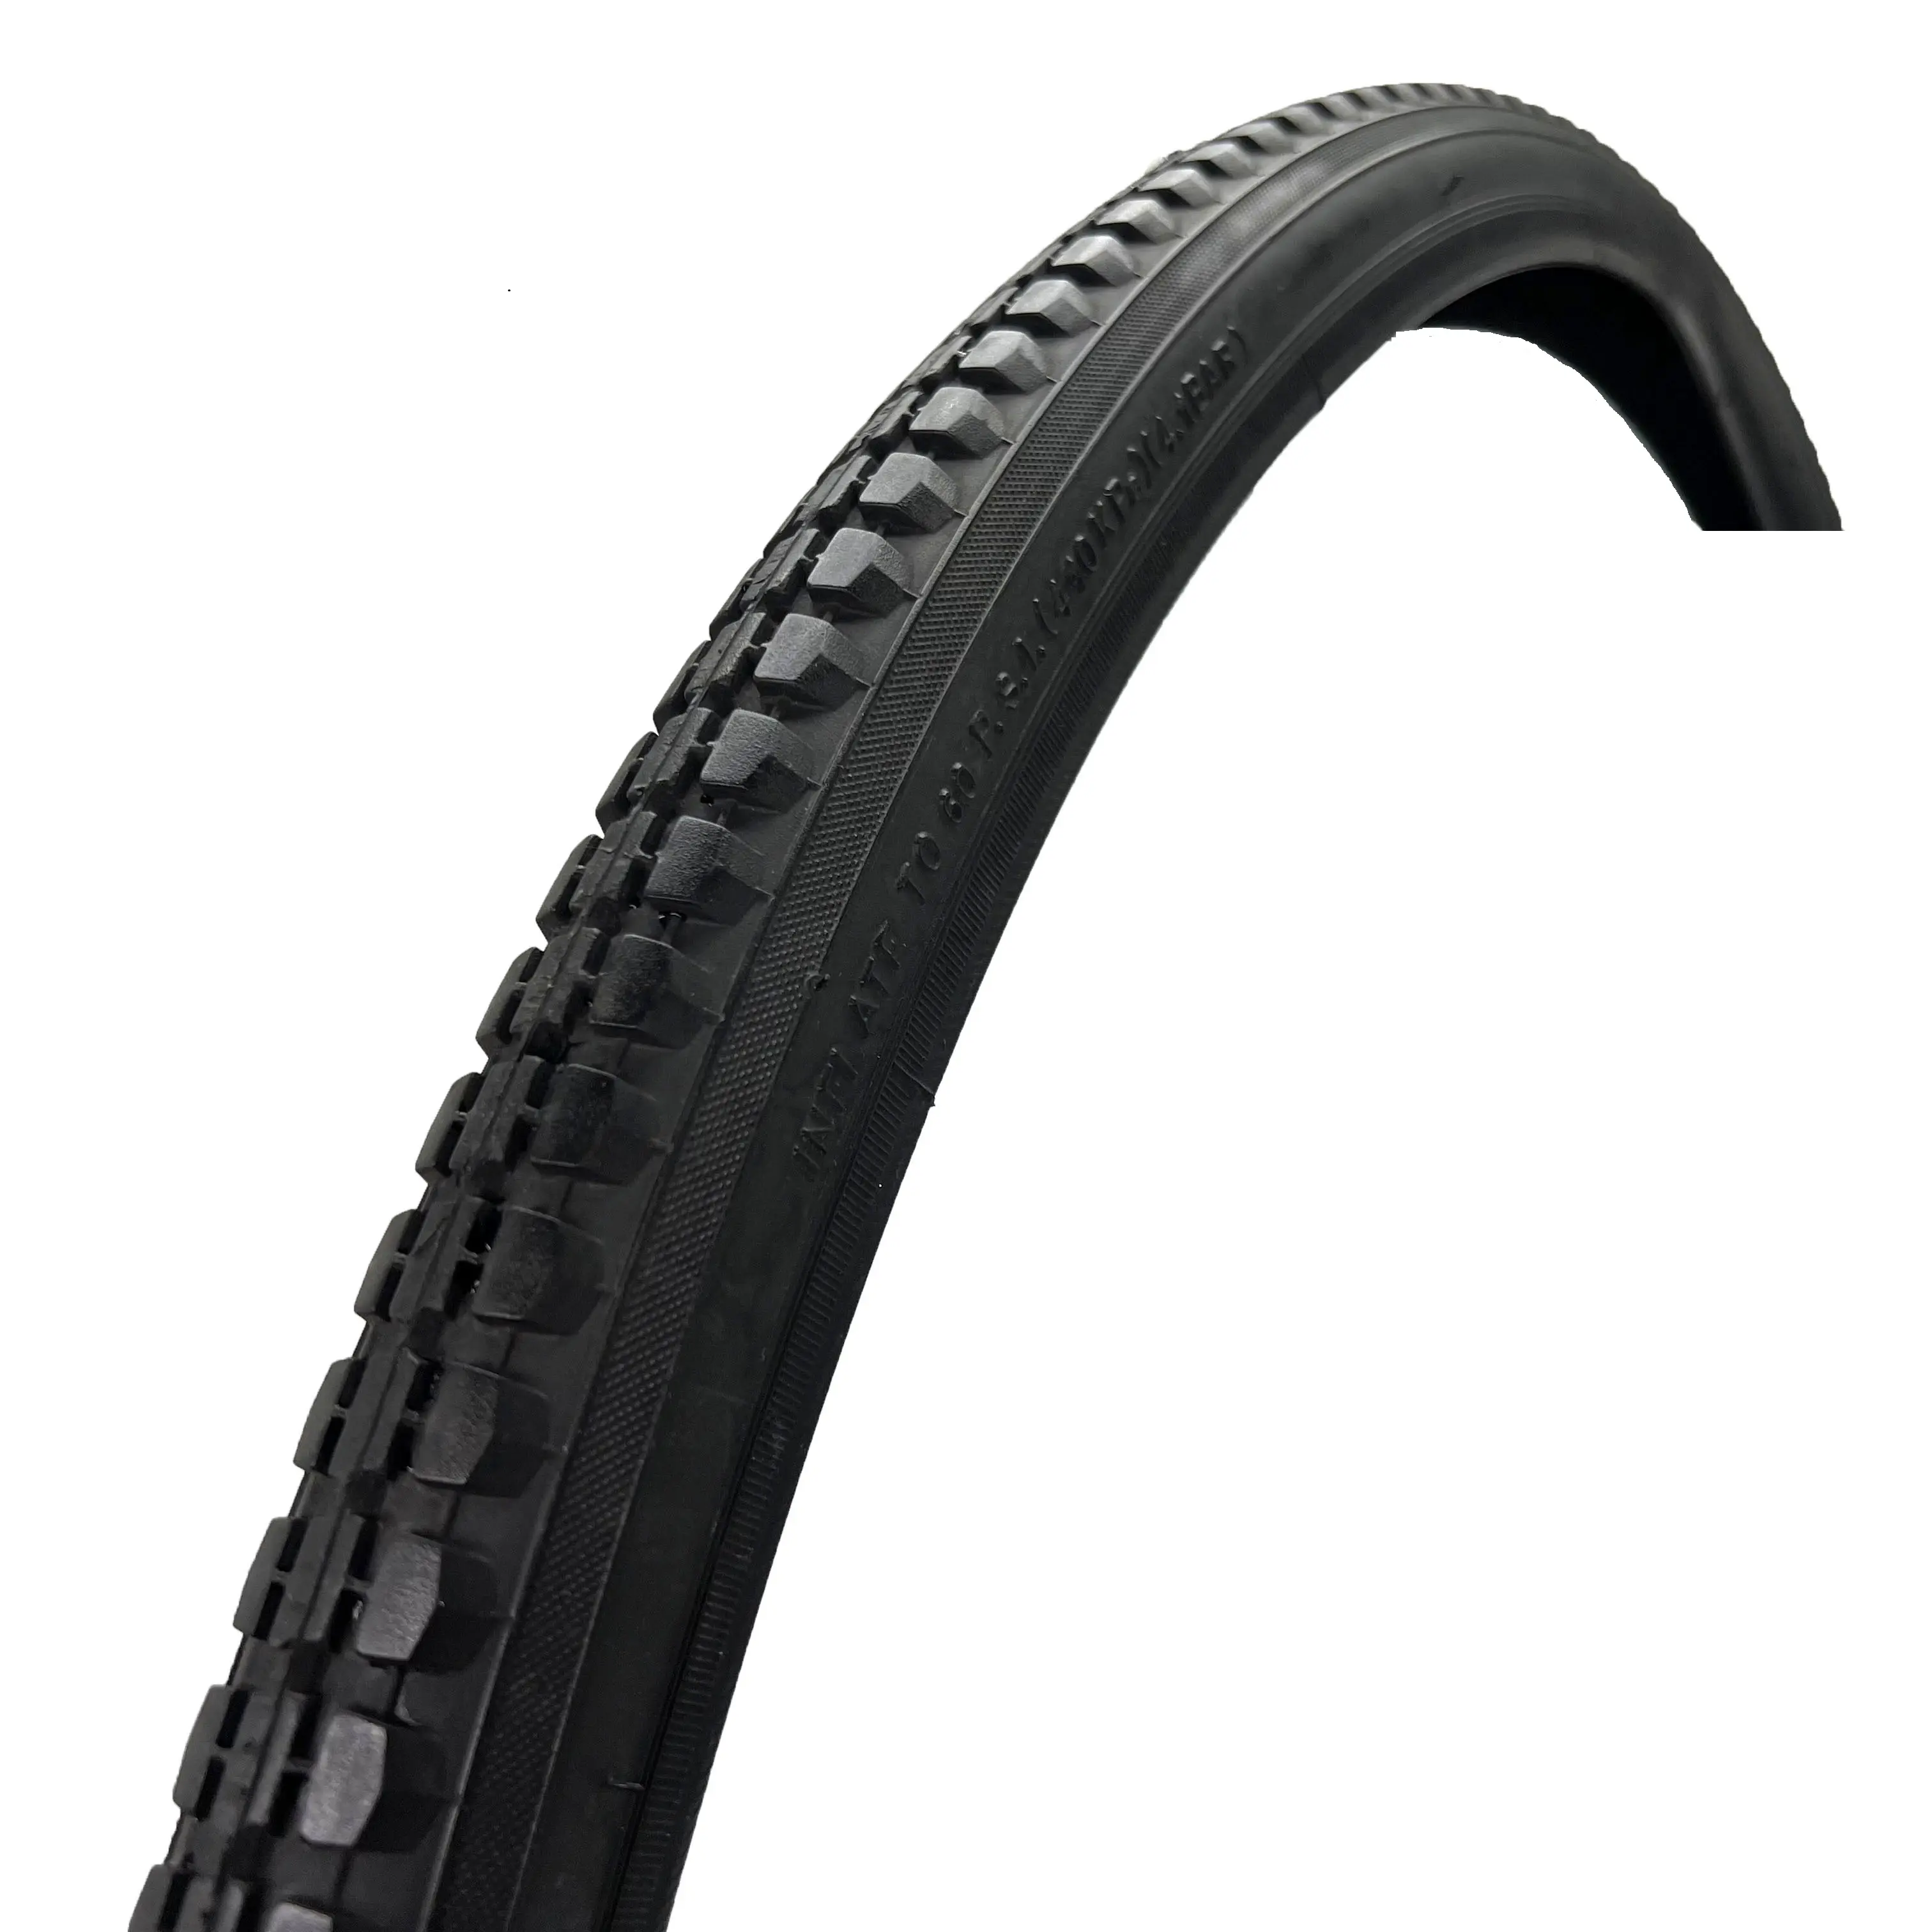 High Quality 28x1 1/2 Tubeless Bicycle Tyre 28-Inch Electric Bike and MTB Tires with Rubber Material Parts and Tubes Included